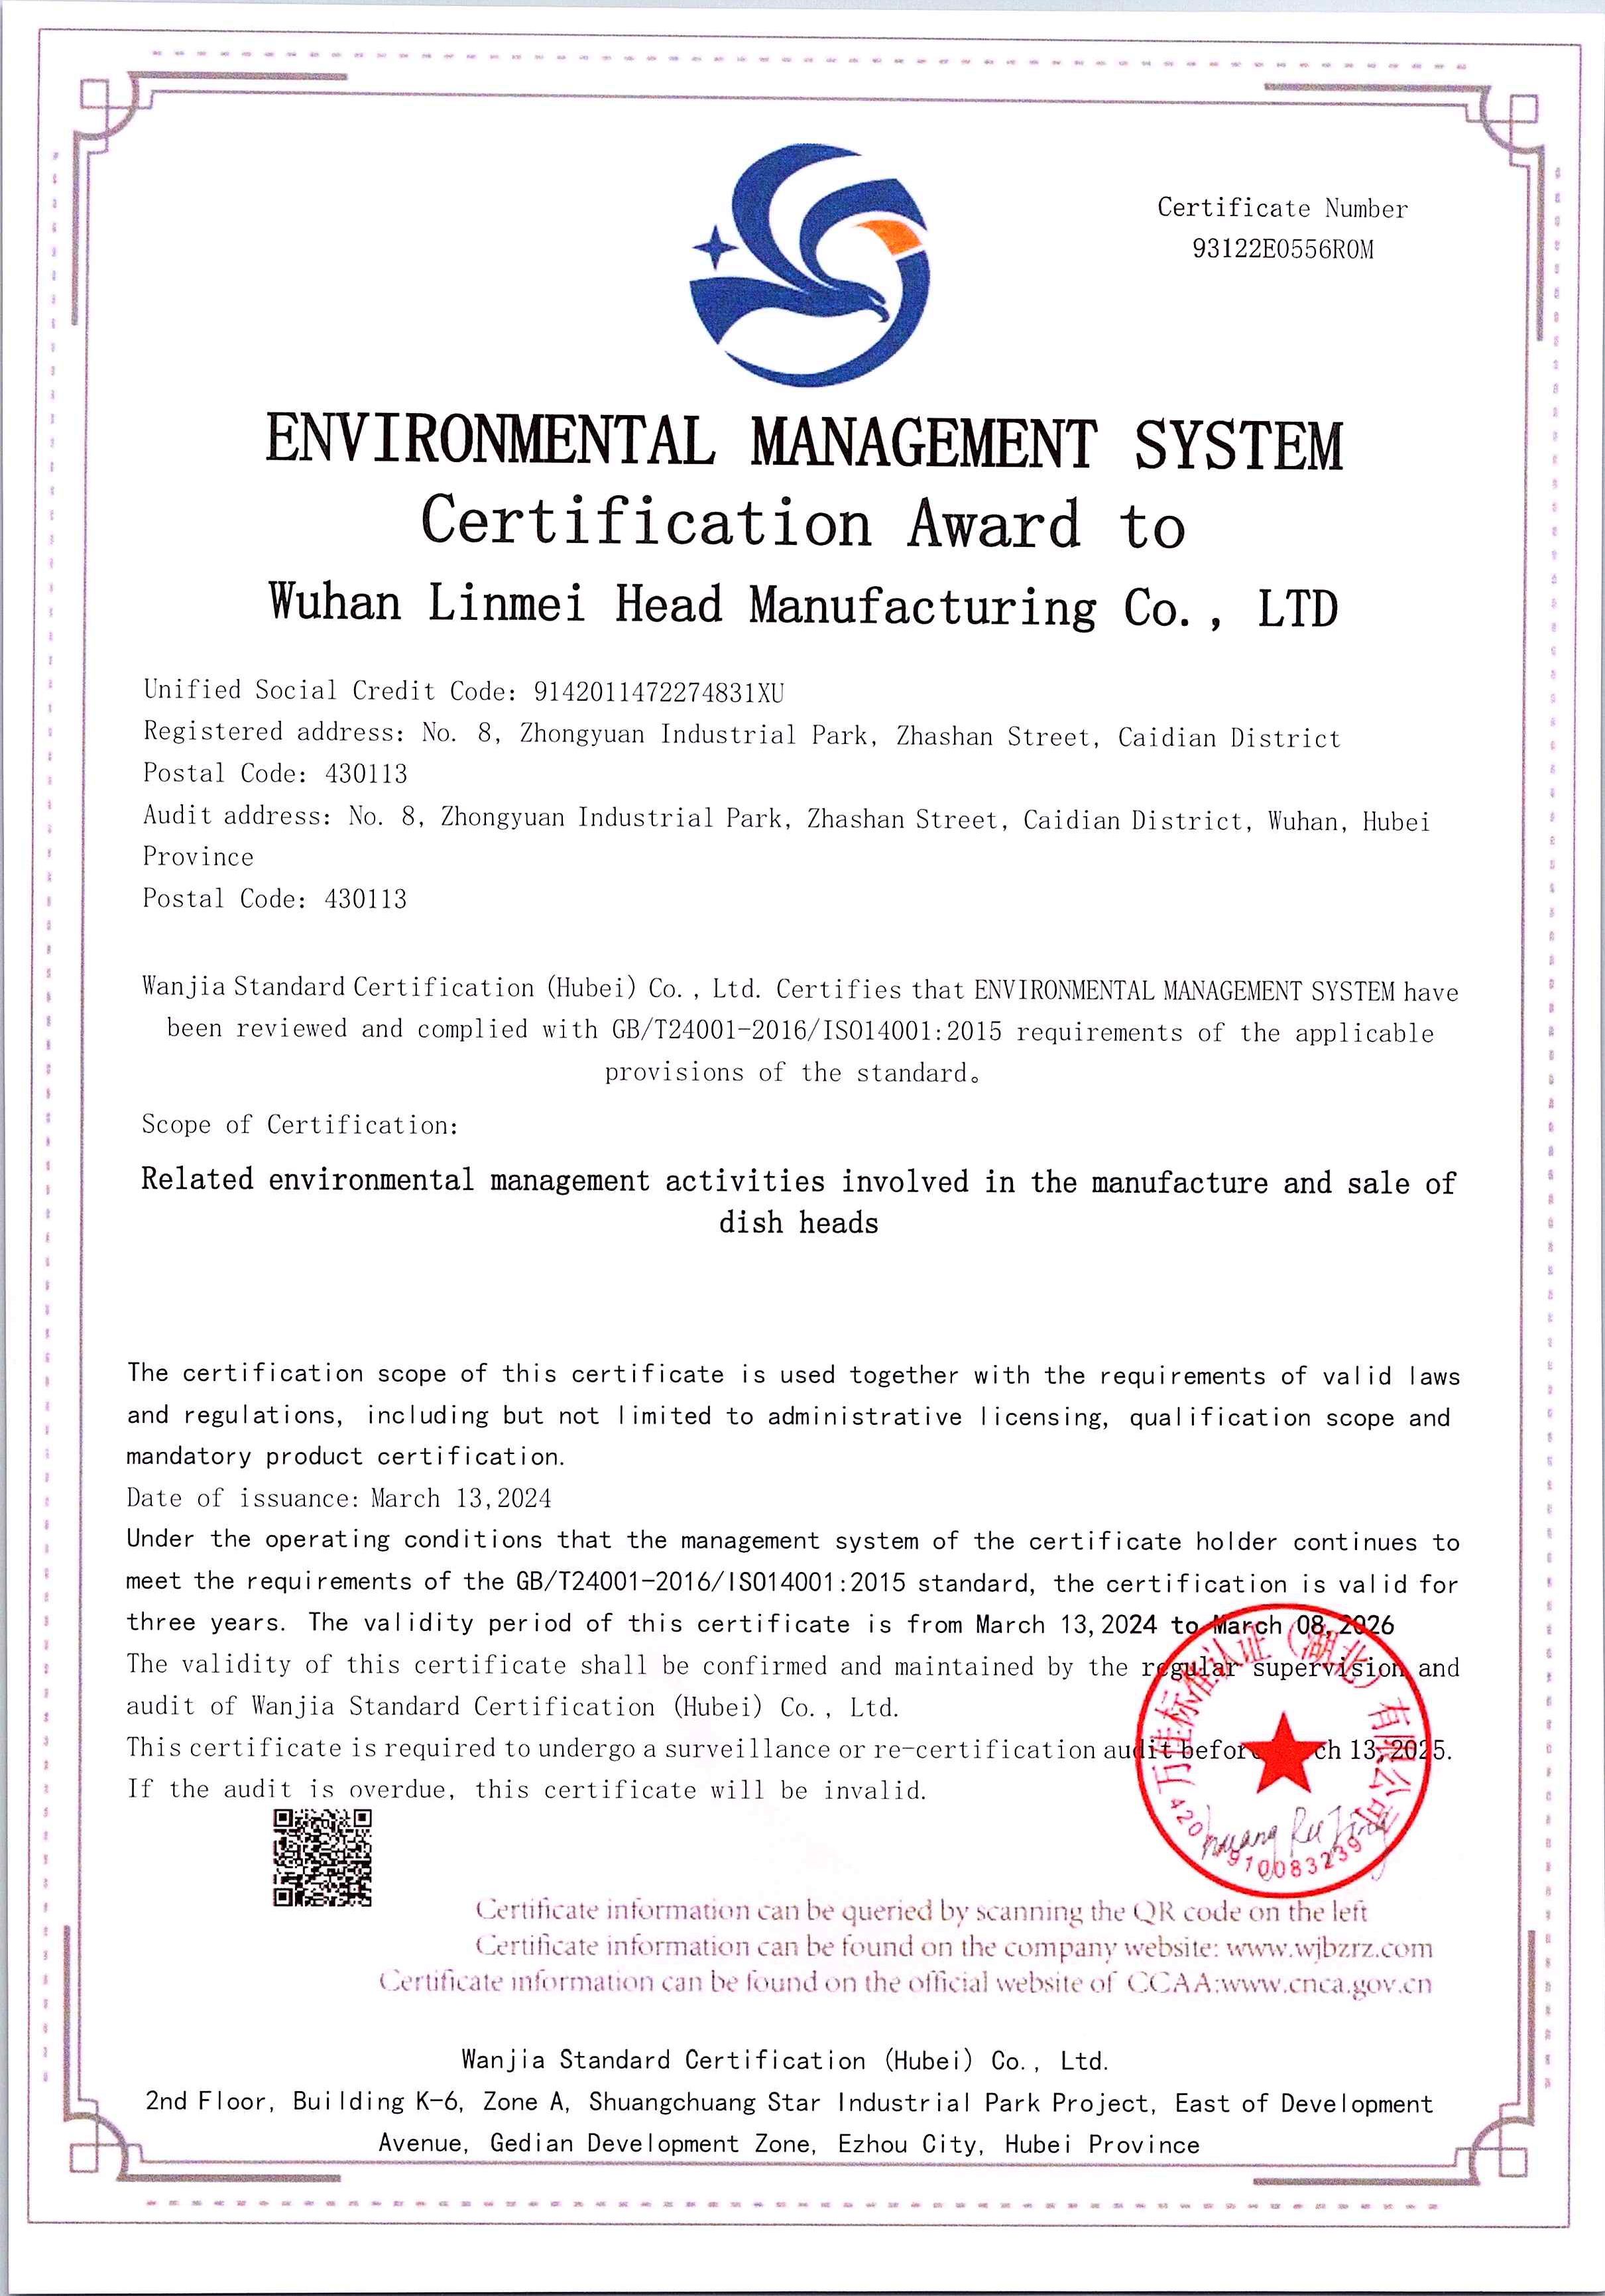 T45001-2020
Scope of Certification:
Relate environmental management activities involved in the manufacture and sale of dish heads